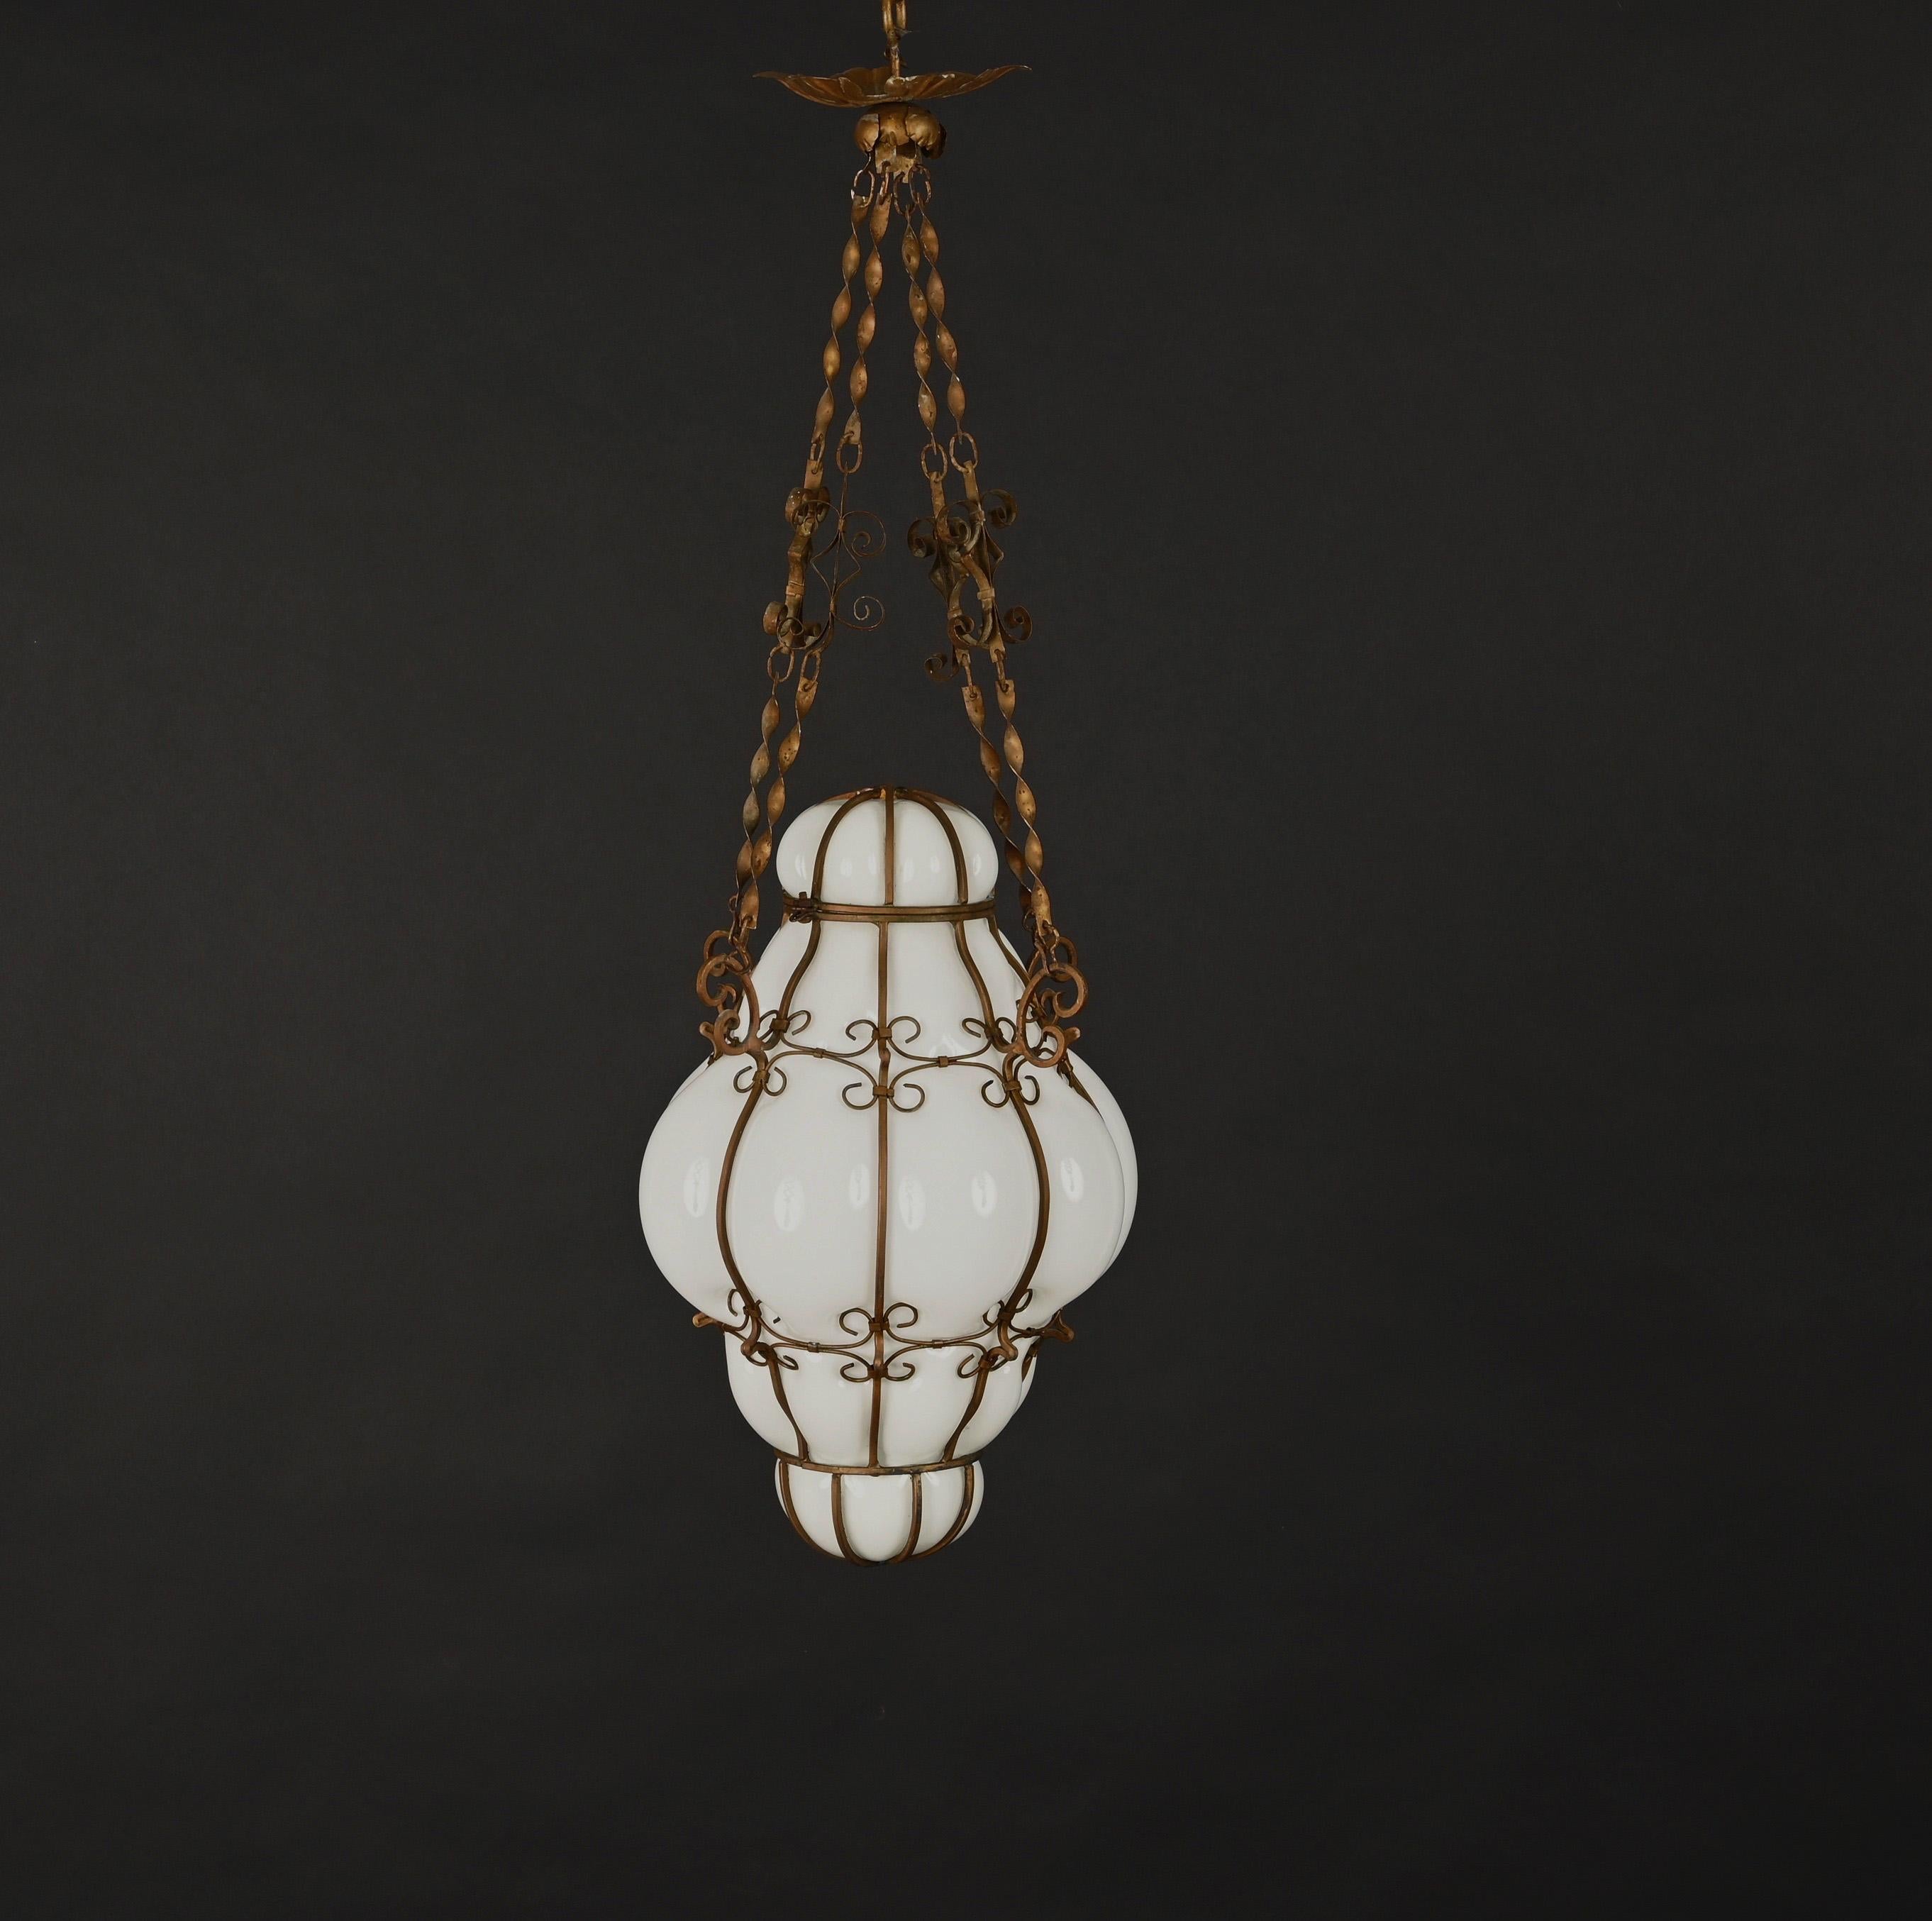 Midcentury Venetian Brass and Mouth Blown Murano White Glass Chandelier, 1940s For Sale 3